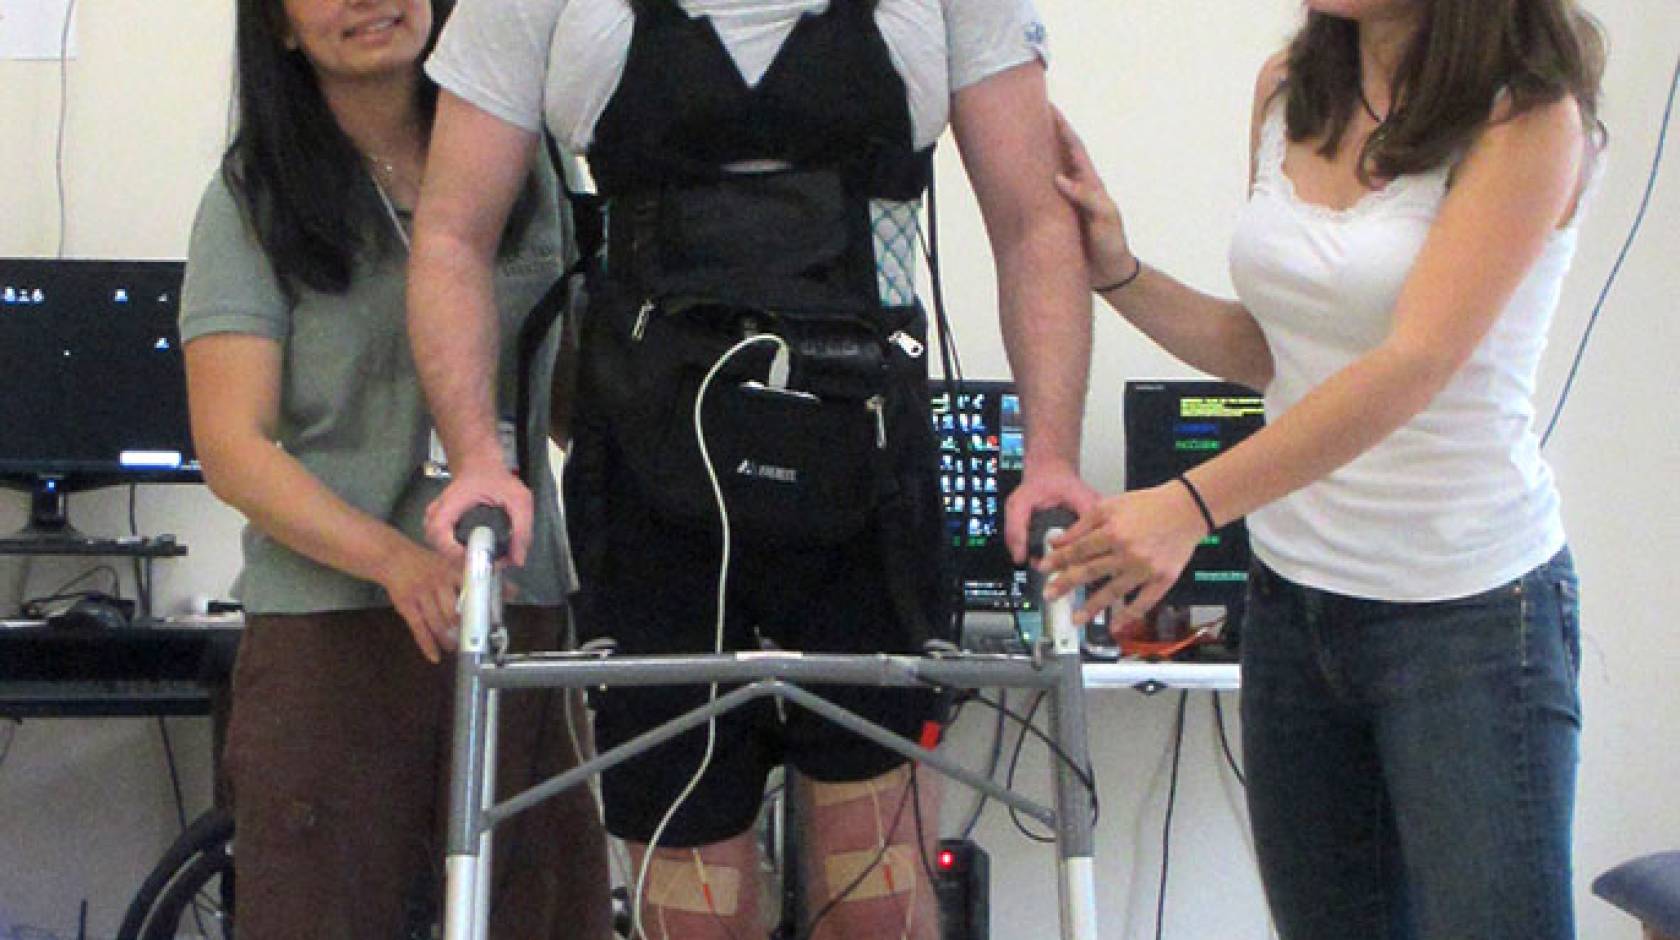 brain-computer interface enables paralyzed man to walk